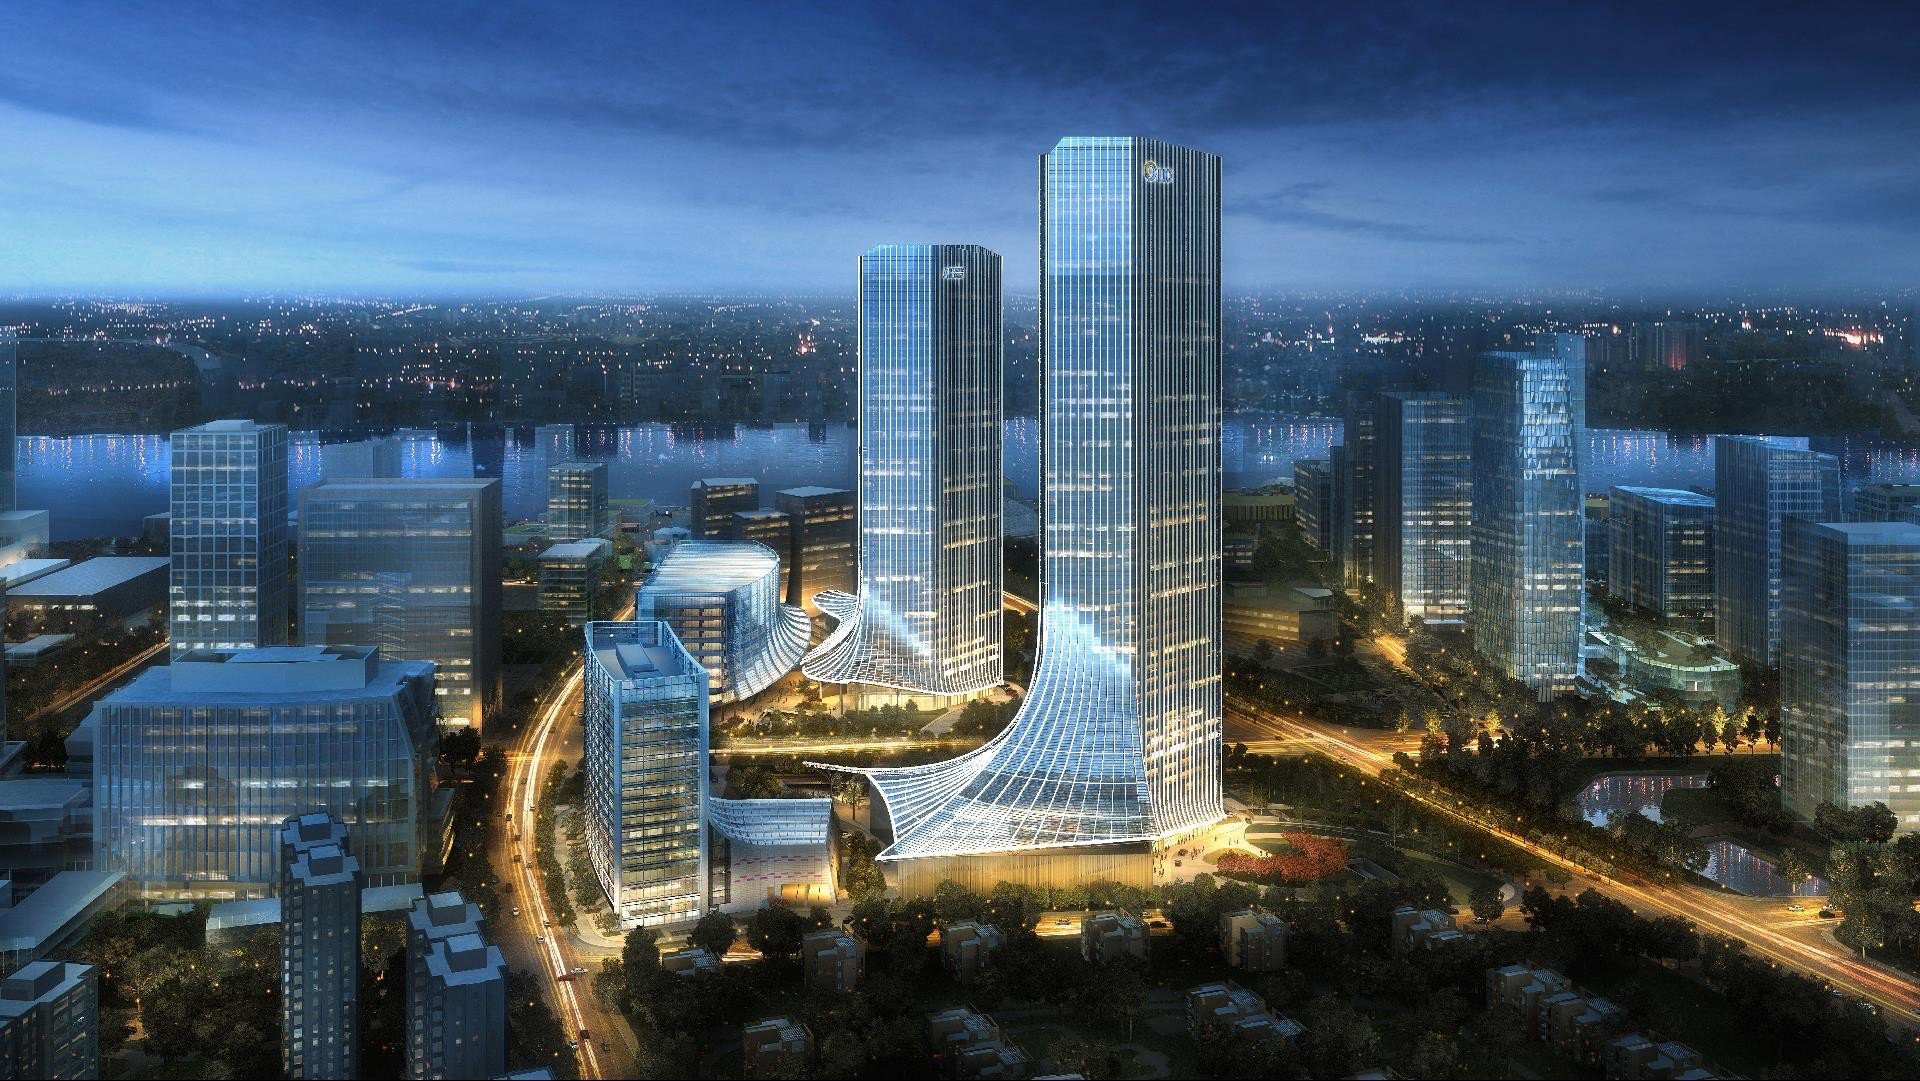 The Westbund Hotel opens next year at the West Bund development, which occupies the site of the Shanghai’s former Lunghwa airport.